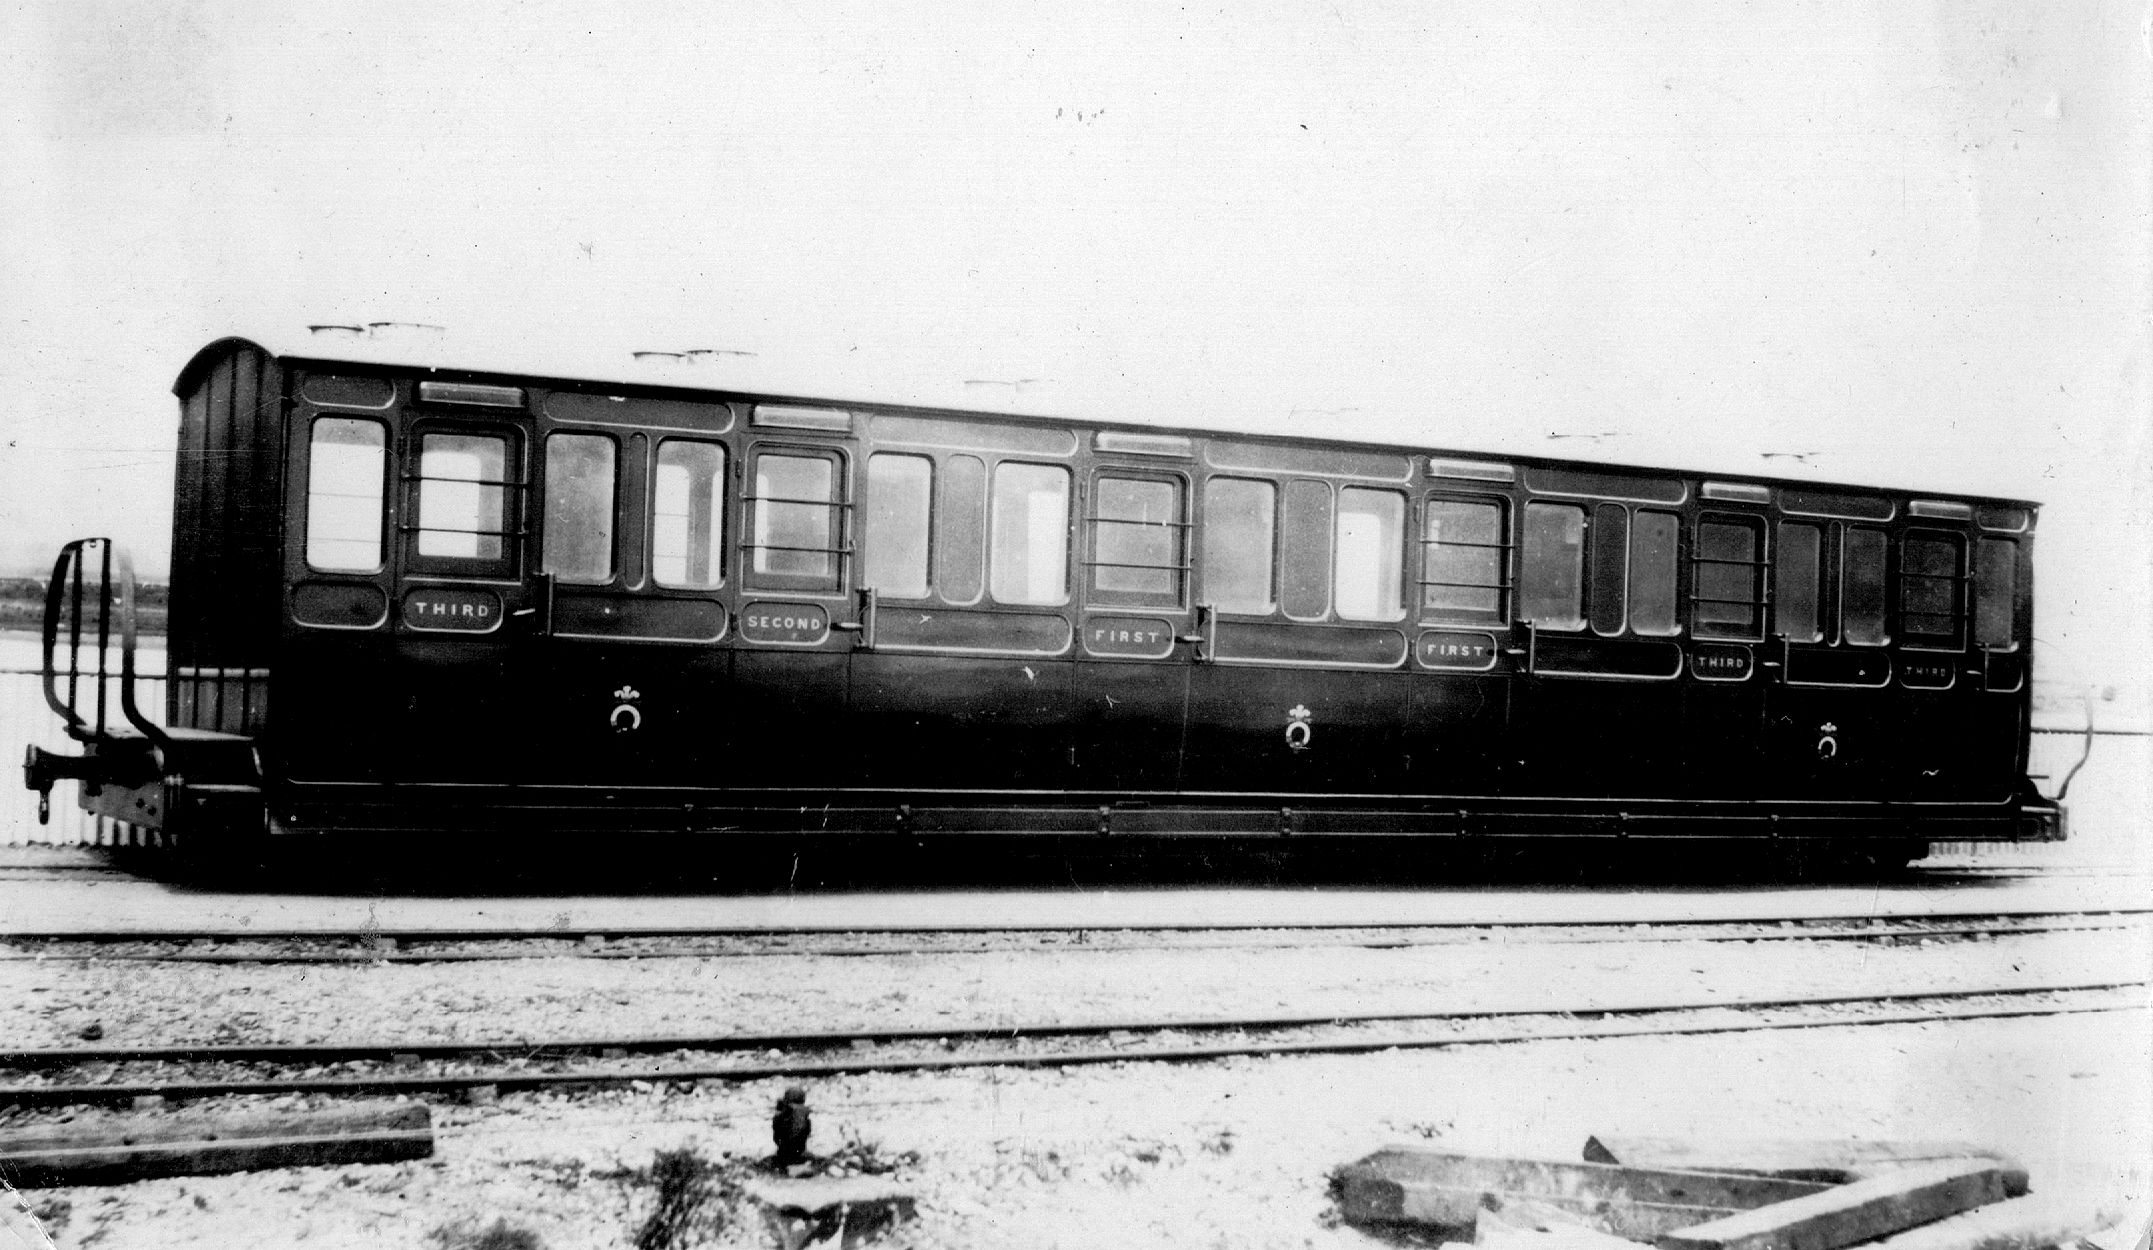 NGRS Collection 3 - Ffestiniog Rly - Undated poss c1900 - Bogie coach poss 15 or 16 at Harbour Station Porthmadog - Loco & General Rly Photos No 6025.jpg